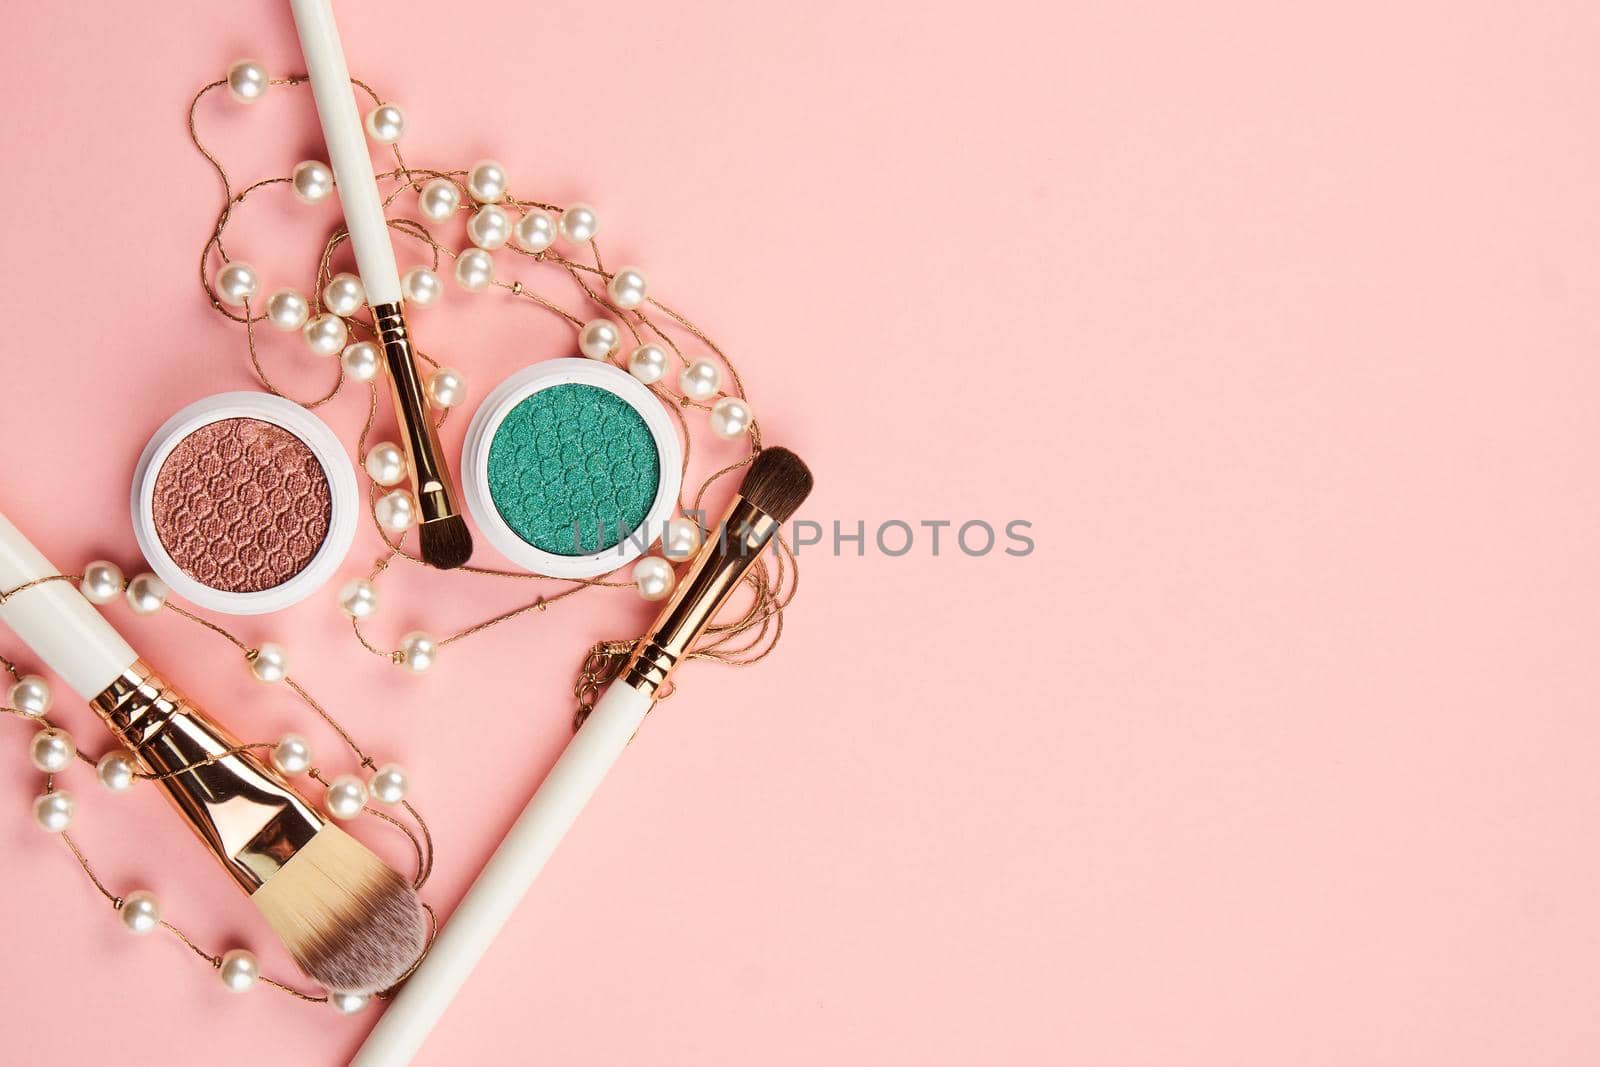 Female makeup decoration accessories on the table pink background top view. High quality photo